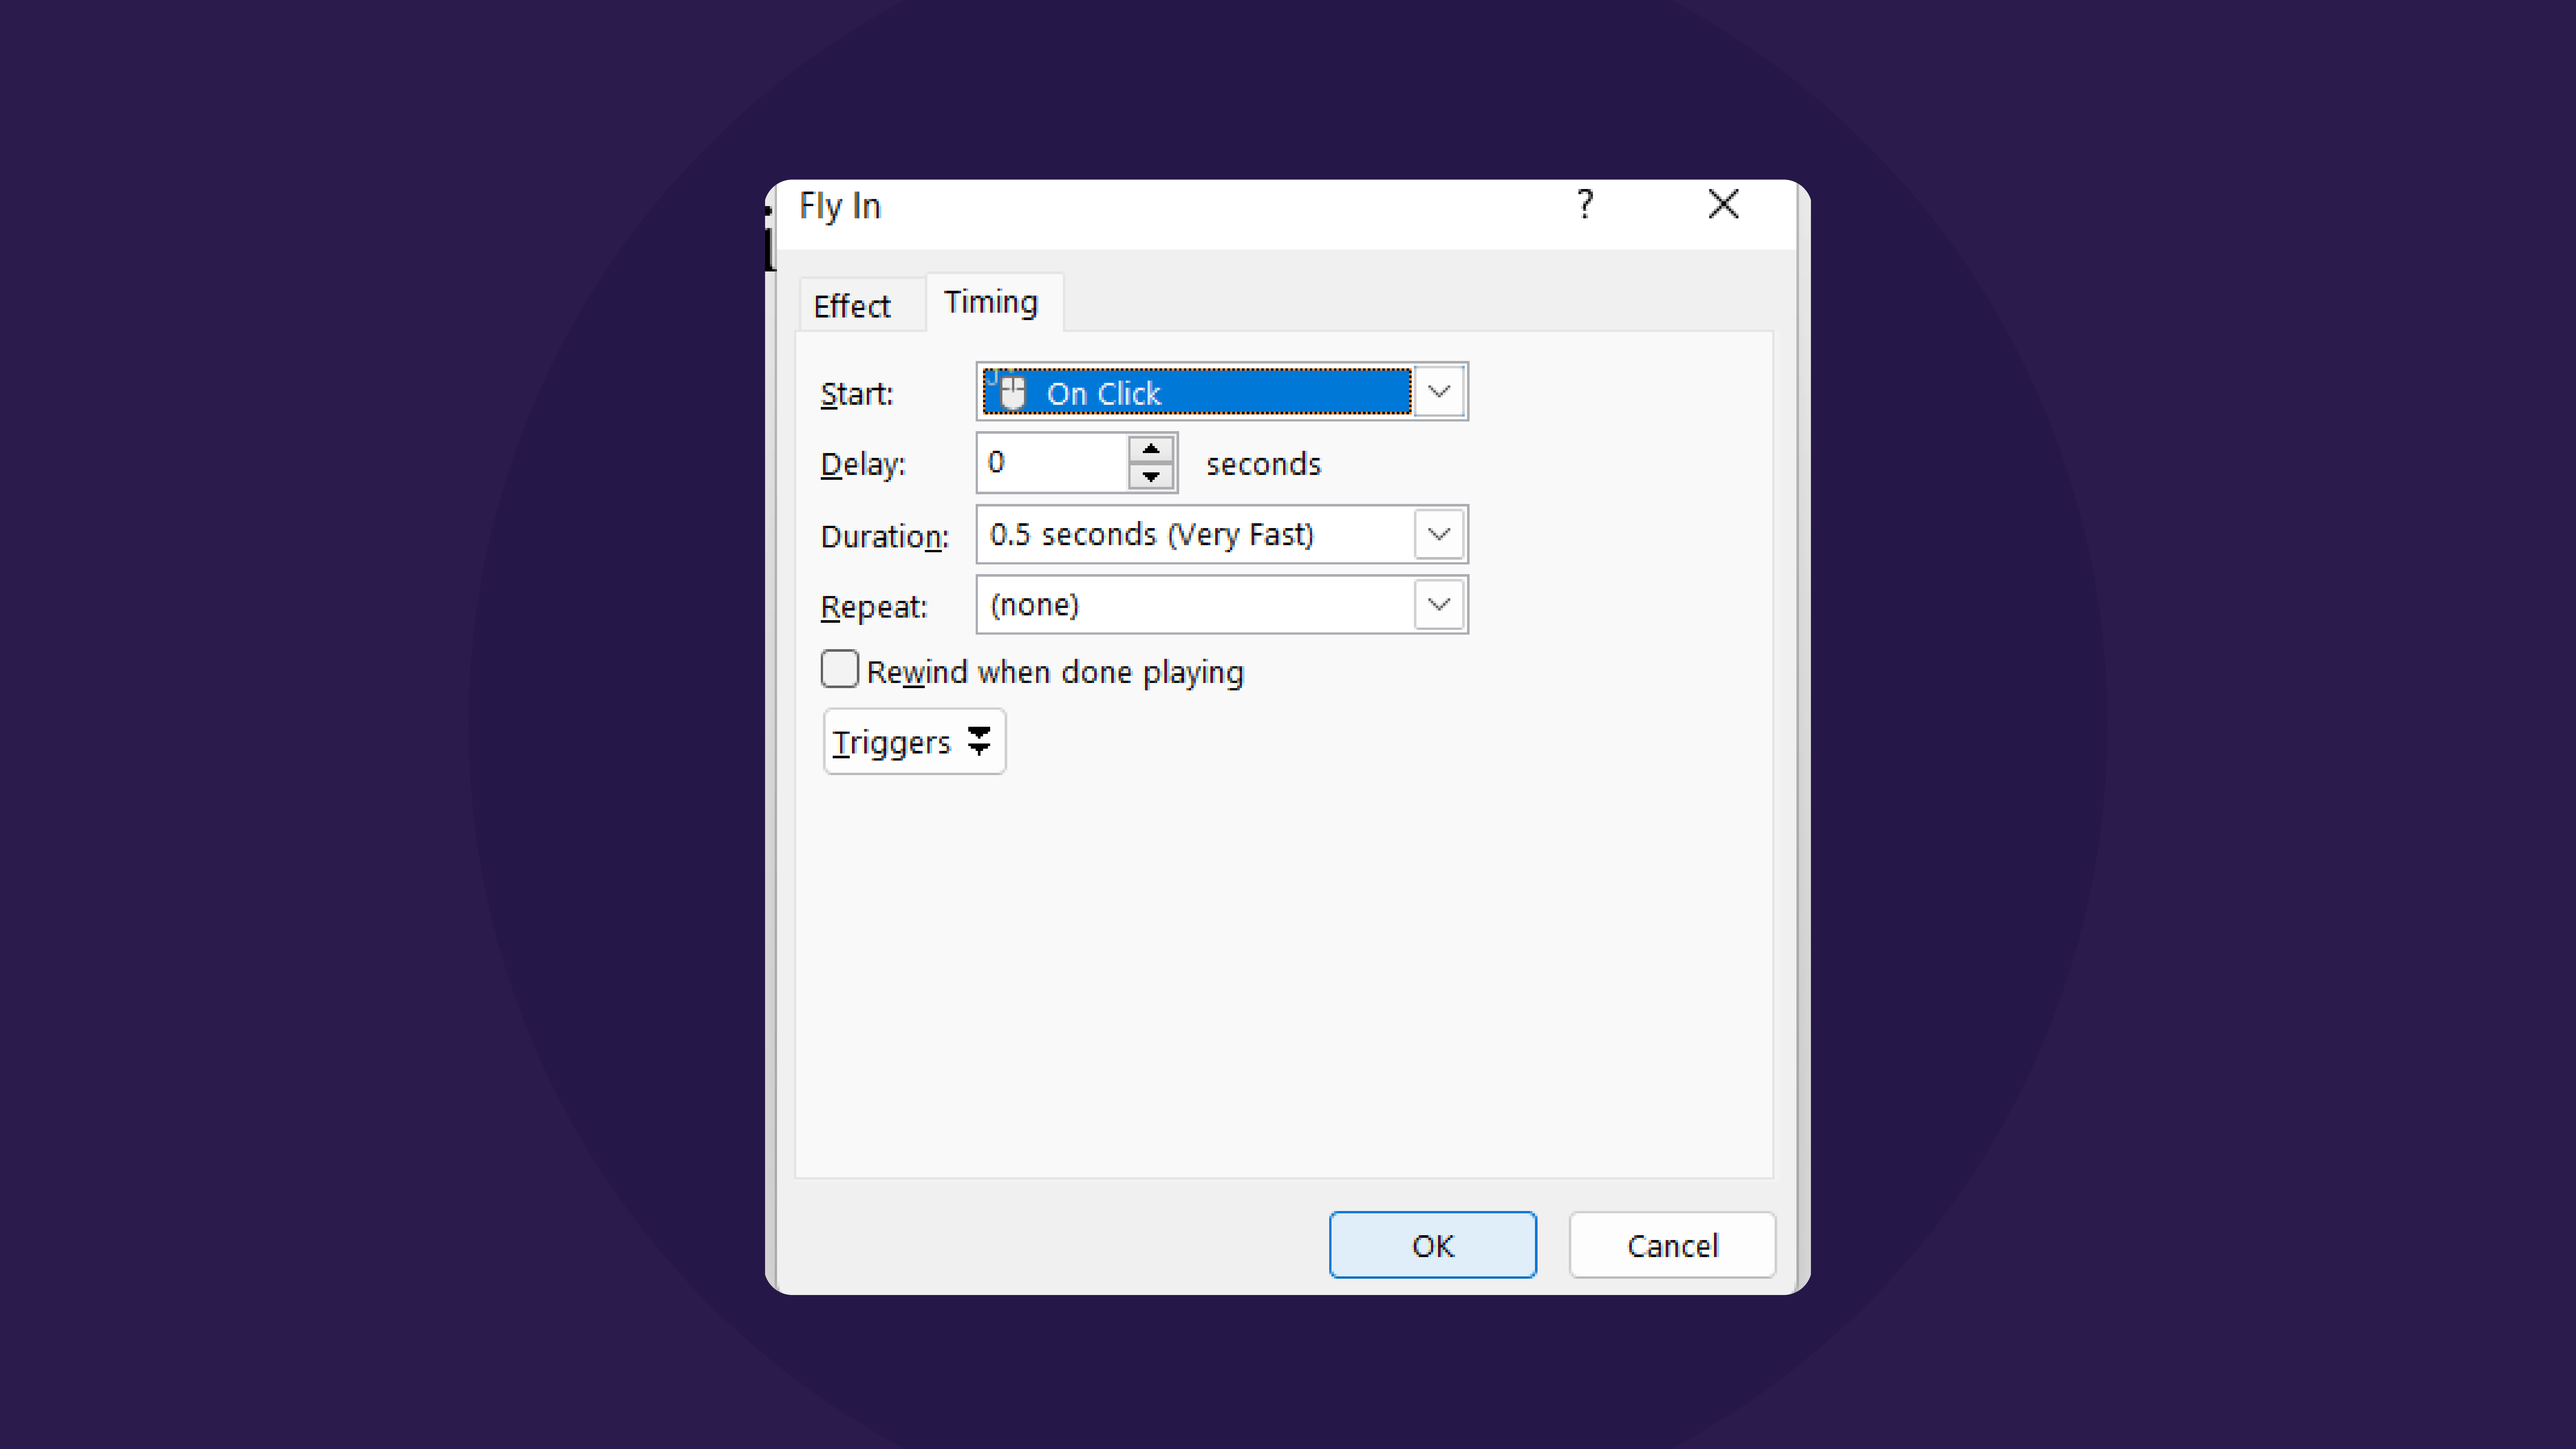 Changing effect timing in Dialog Box